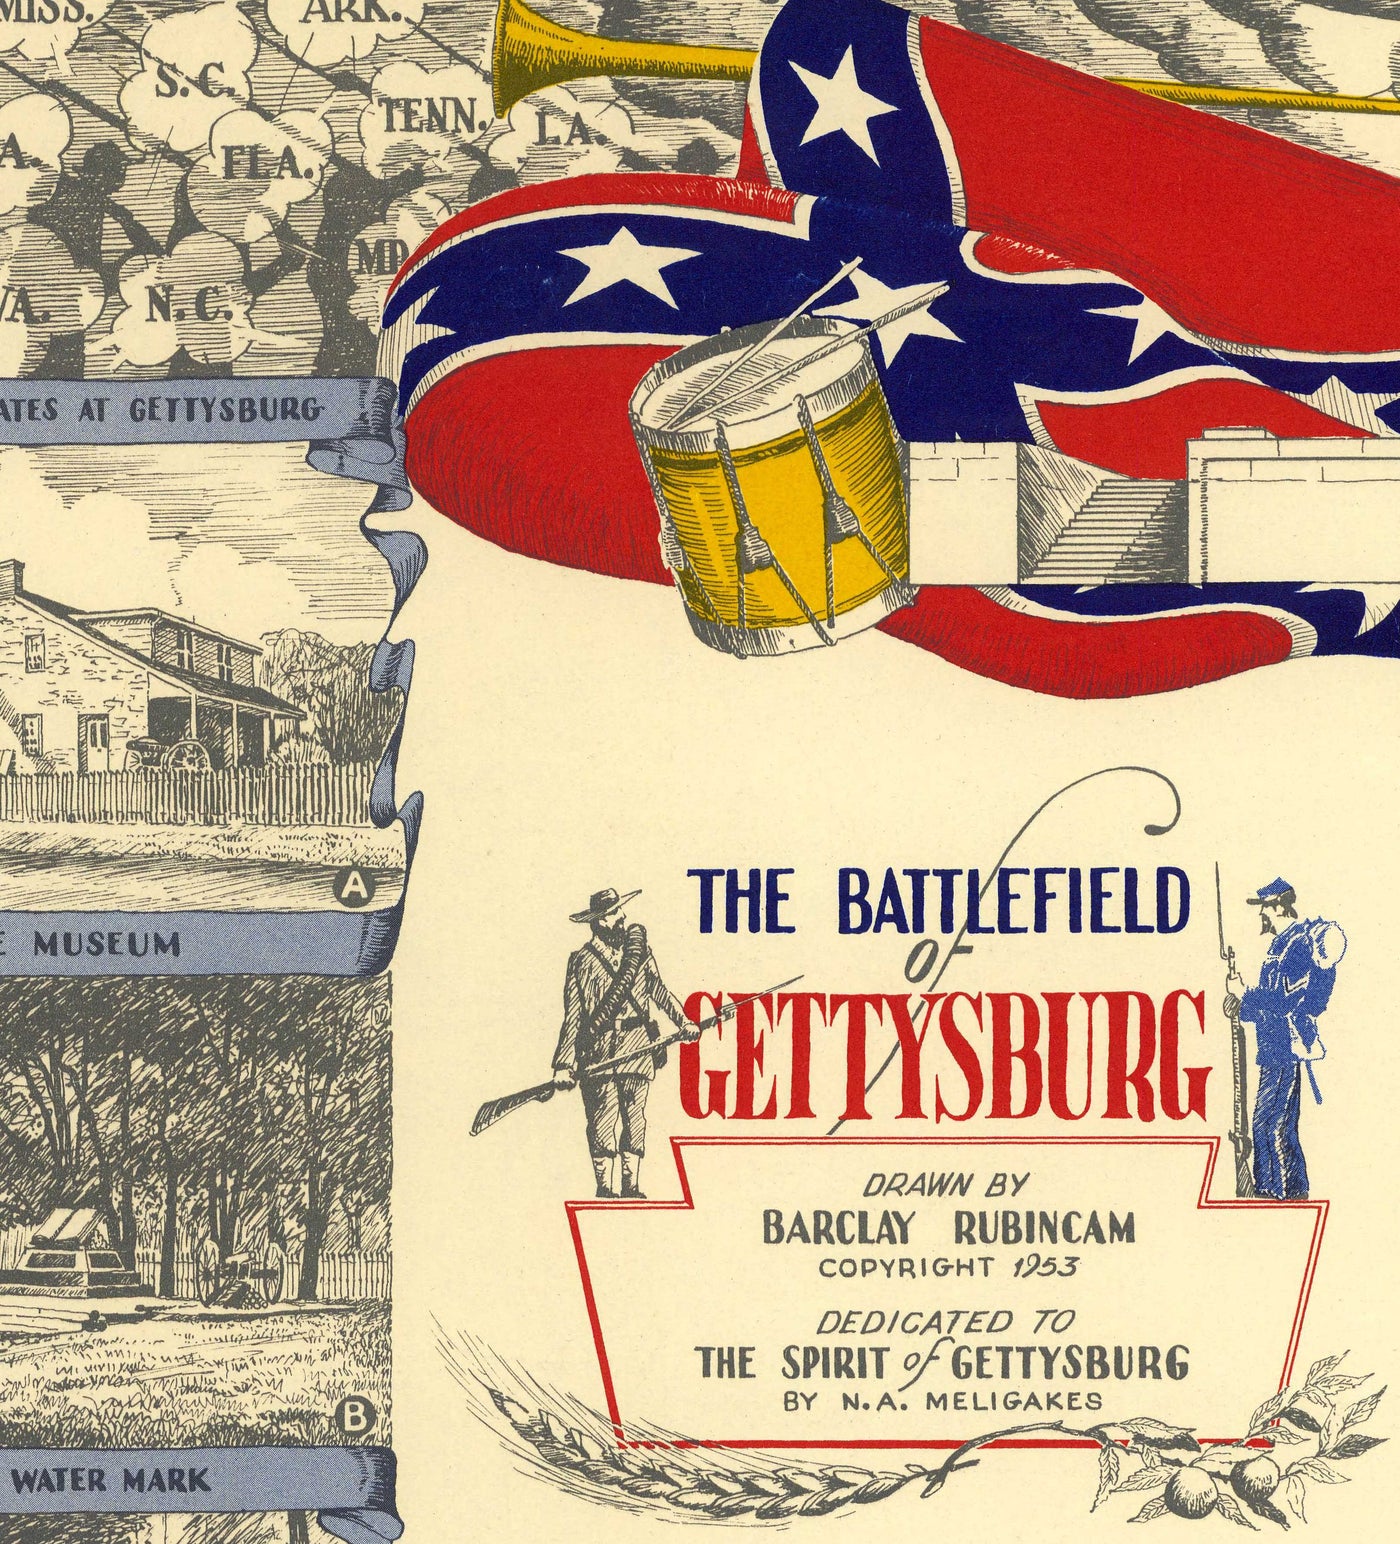 Old Map of the Battle of Gettysburg in 1953 by Barclay Rubincam - Civil War - Confederacy vs. Union Memorial Chart